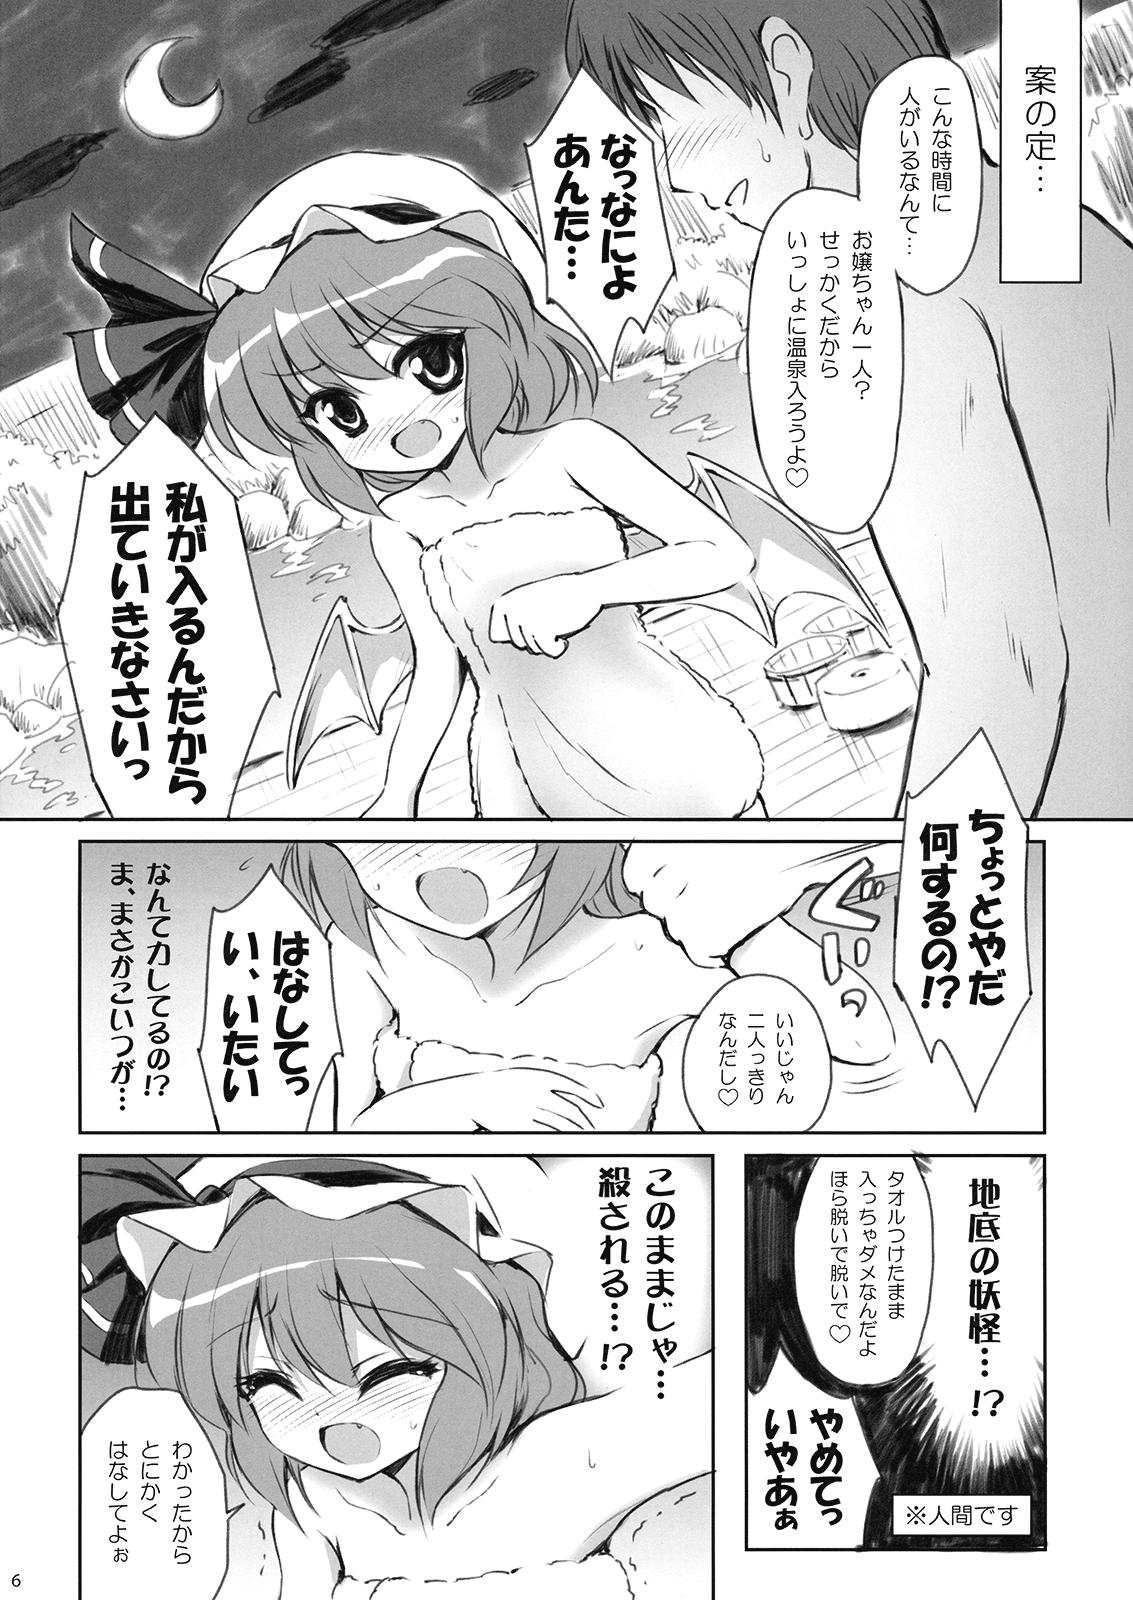 Oral Porn CHILD DRAGON - Touhou project China - Page 6